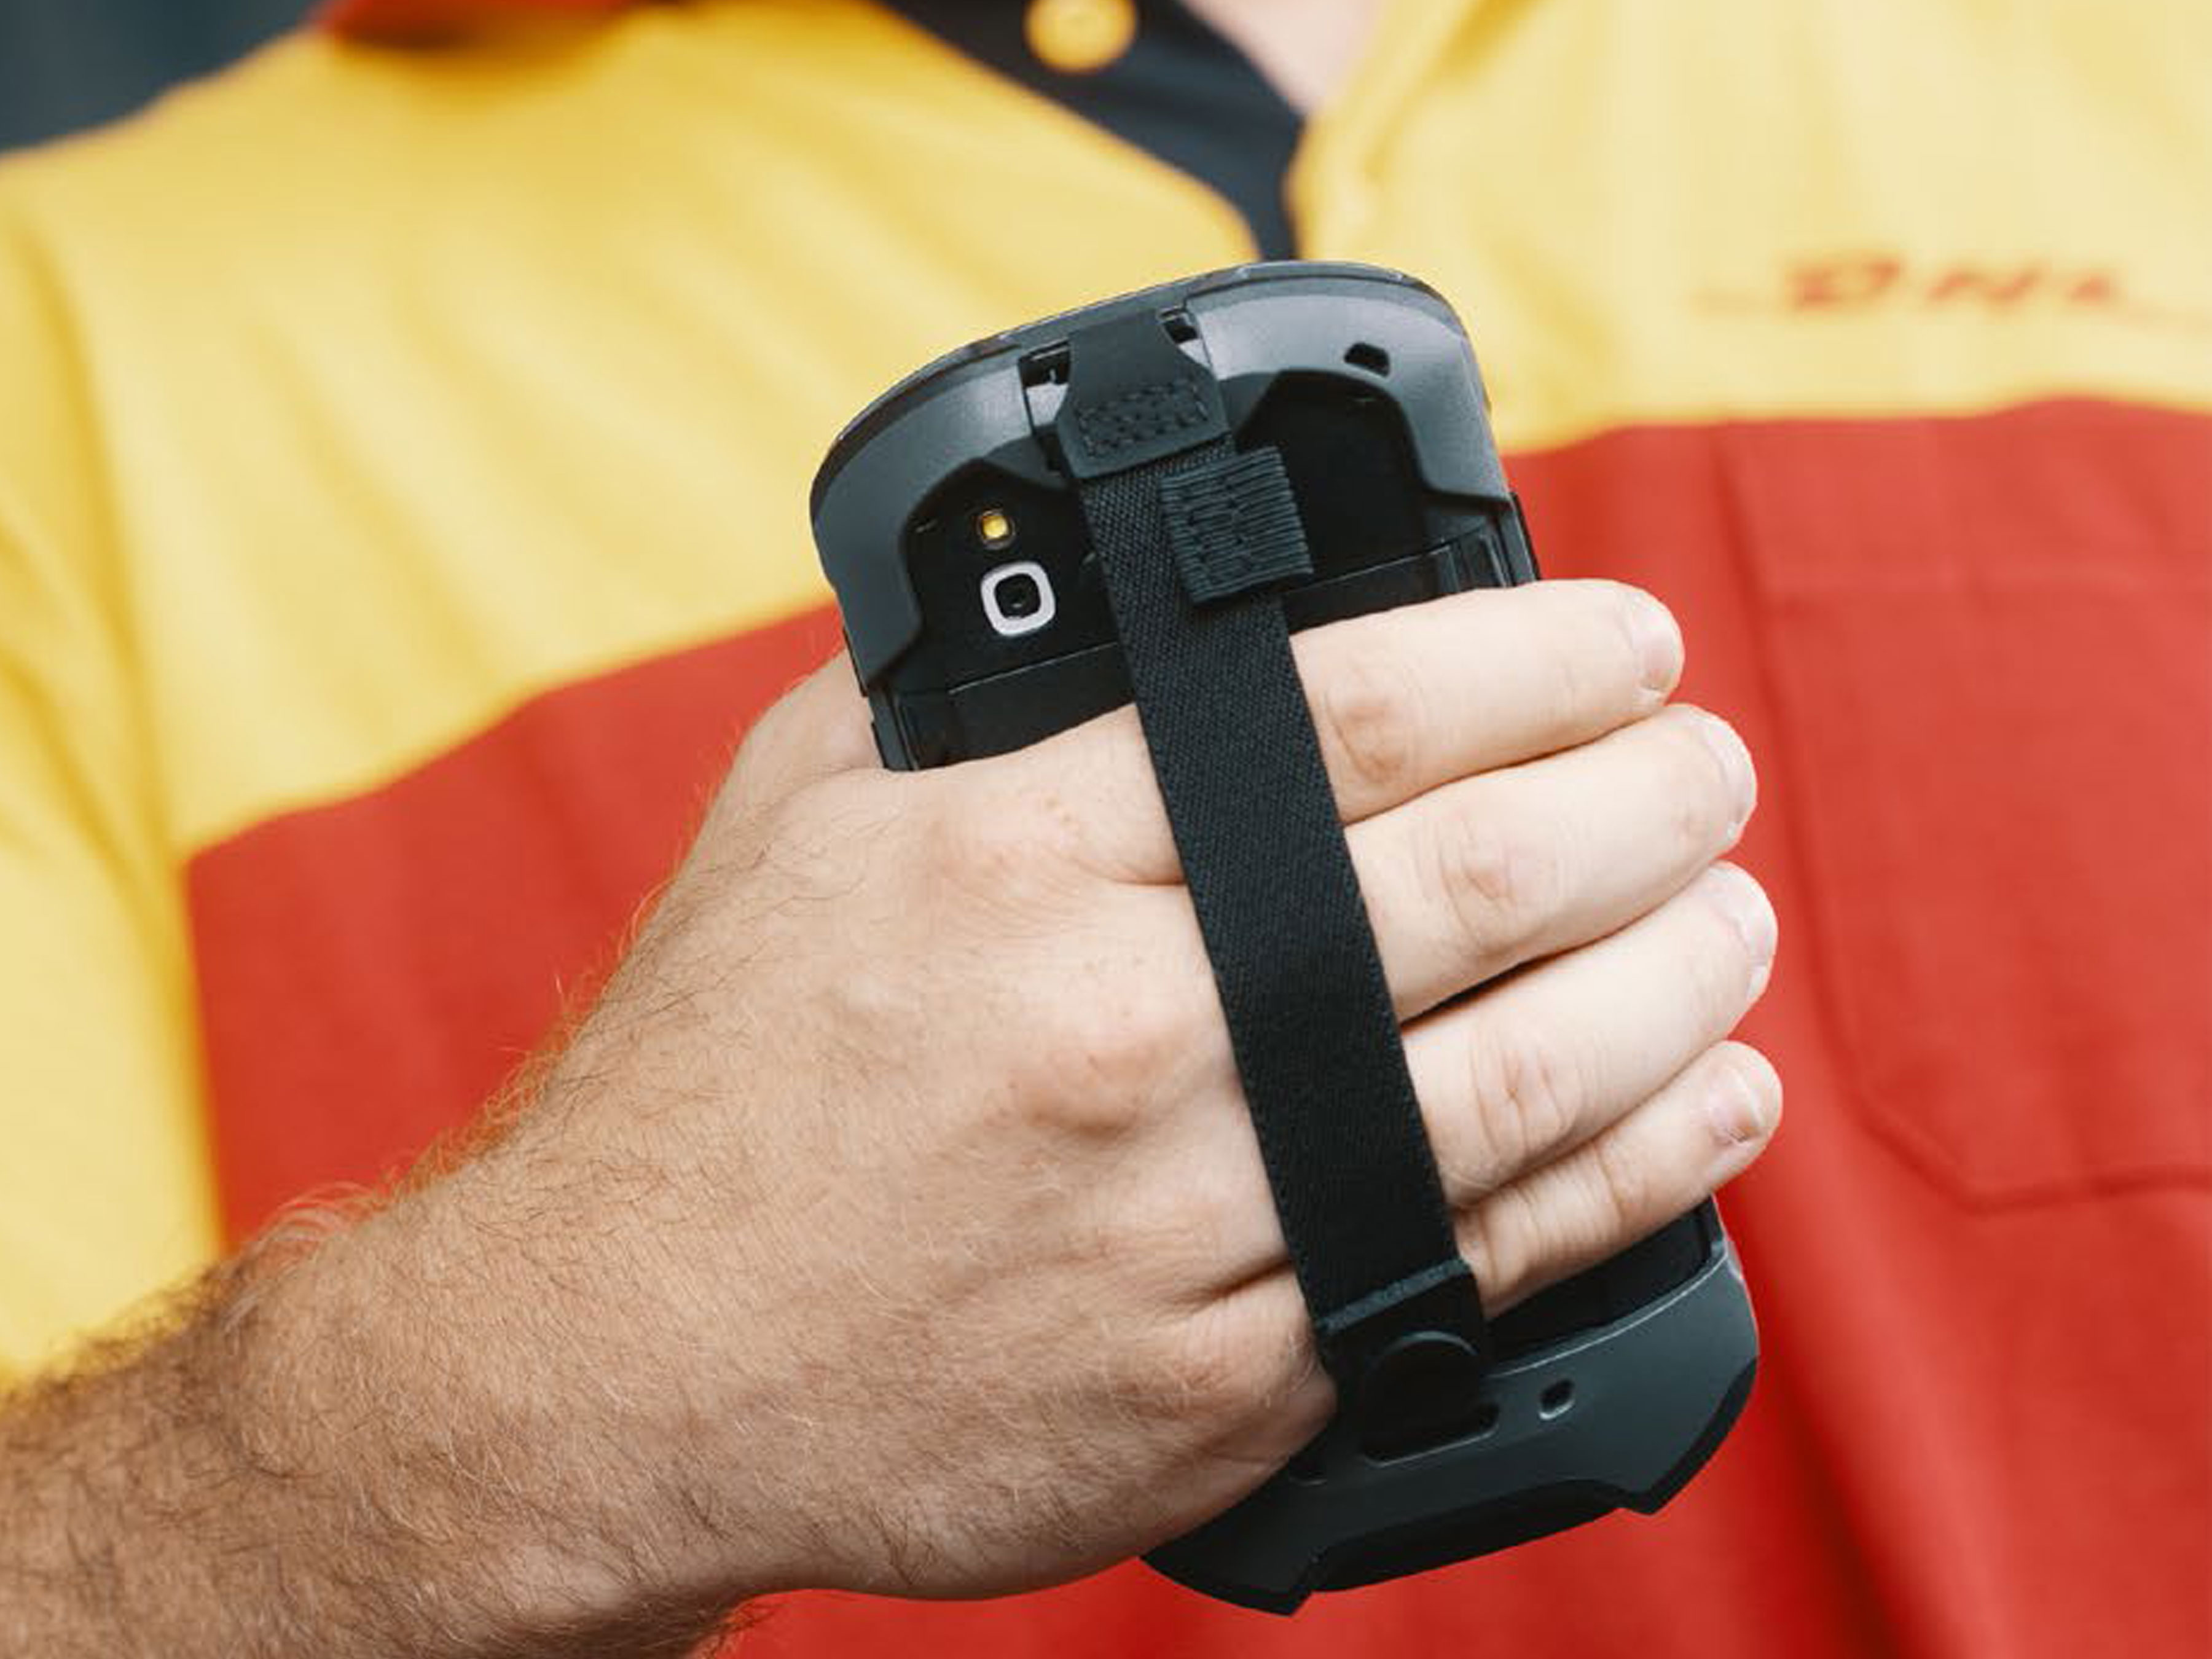 DHL employee holding a scanner